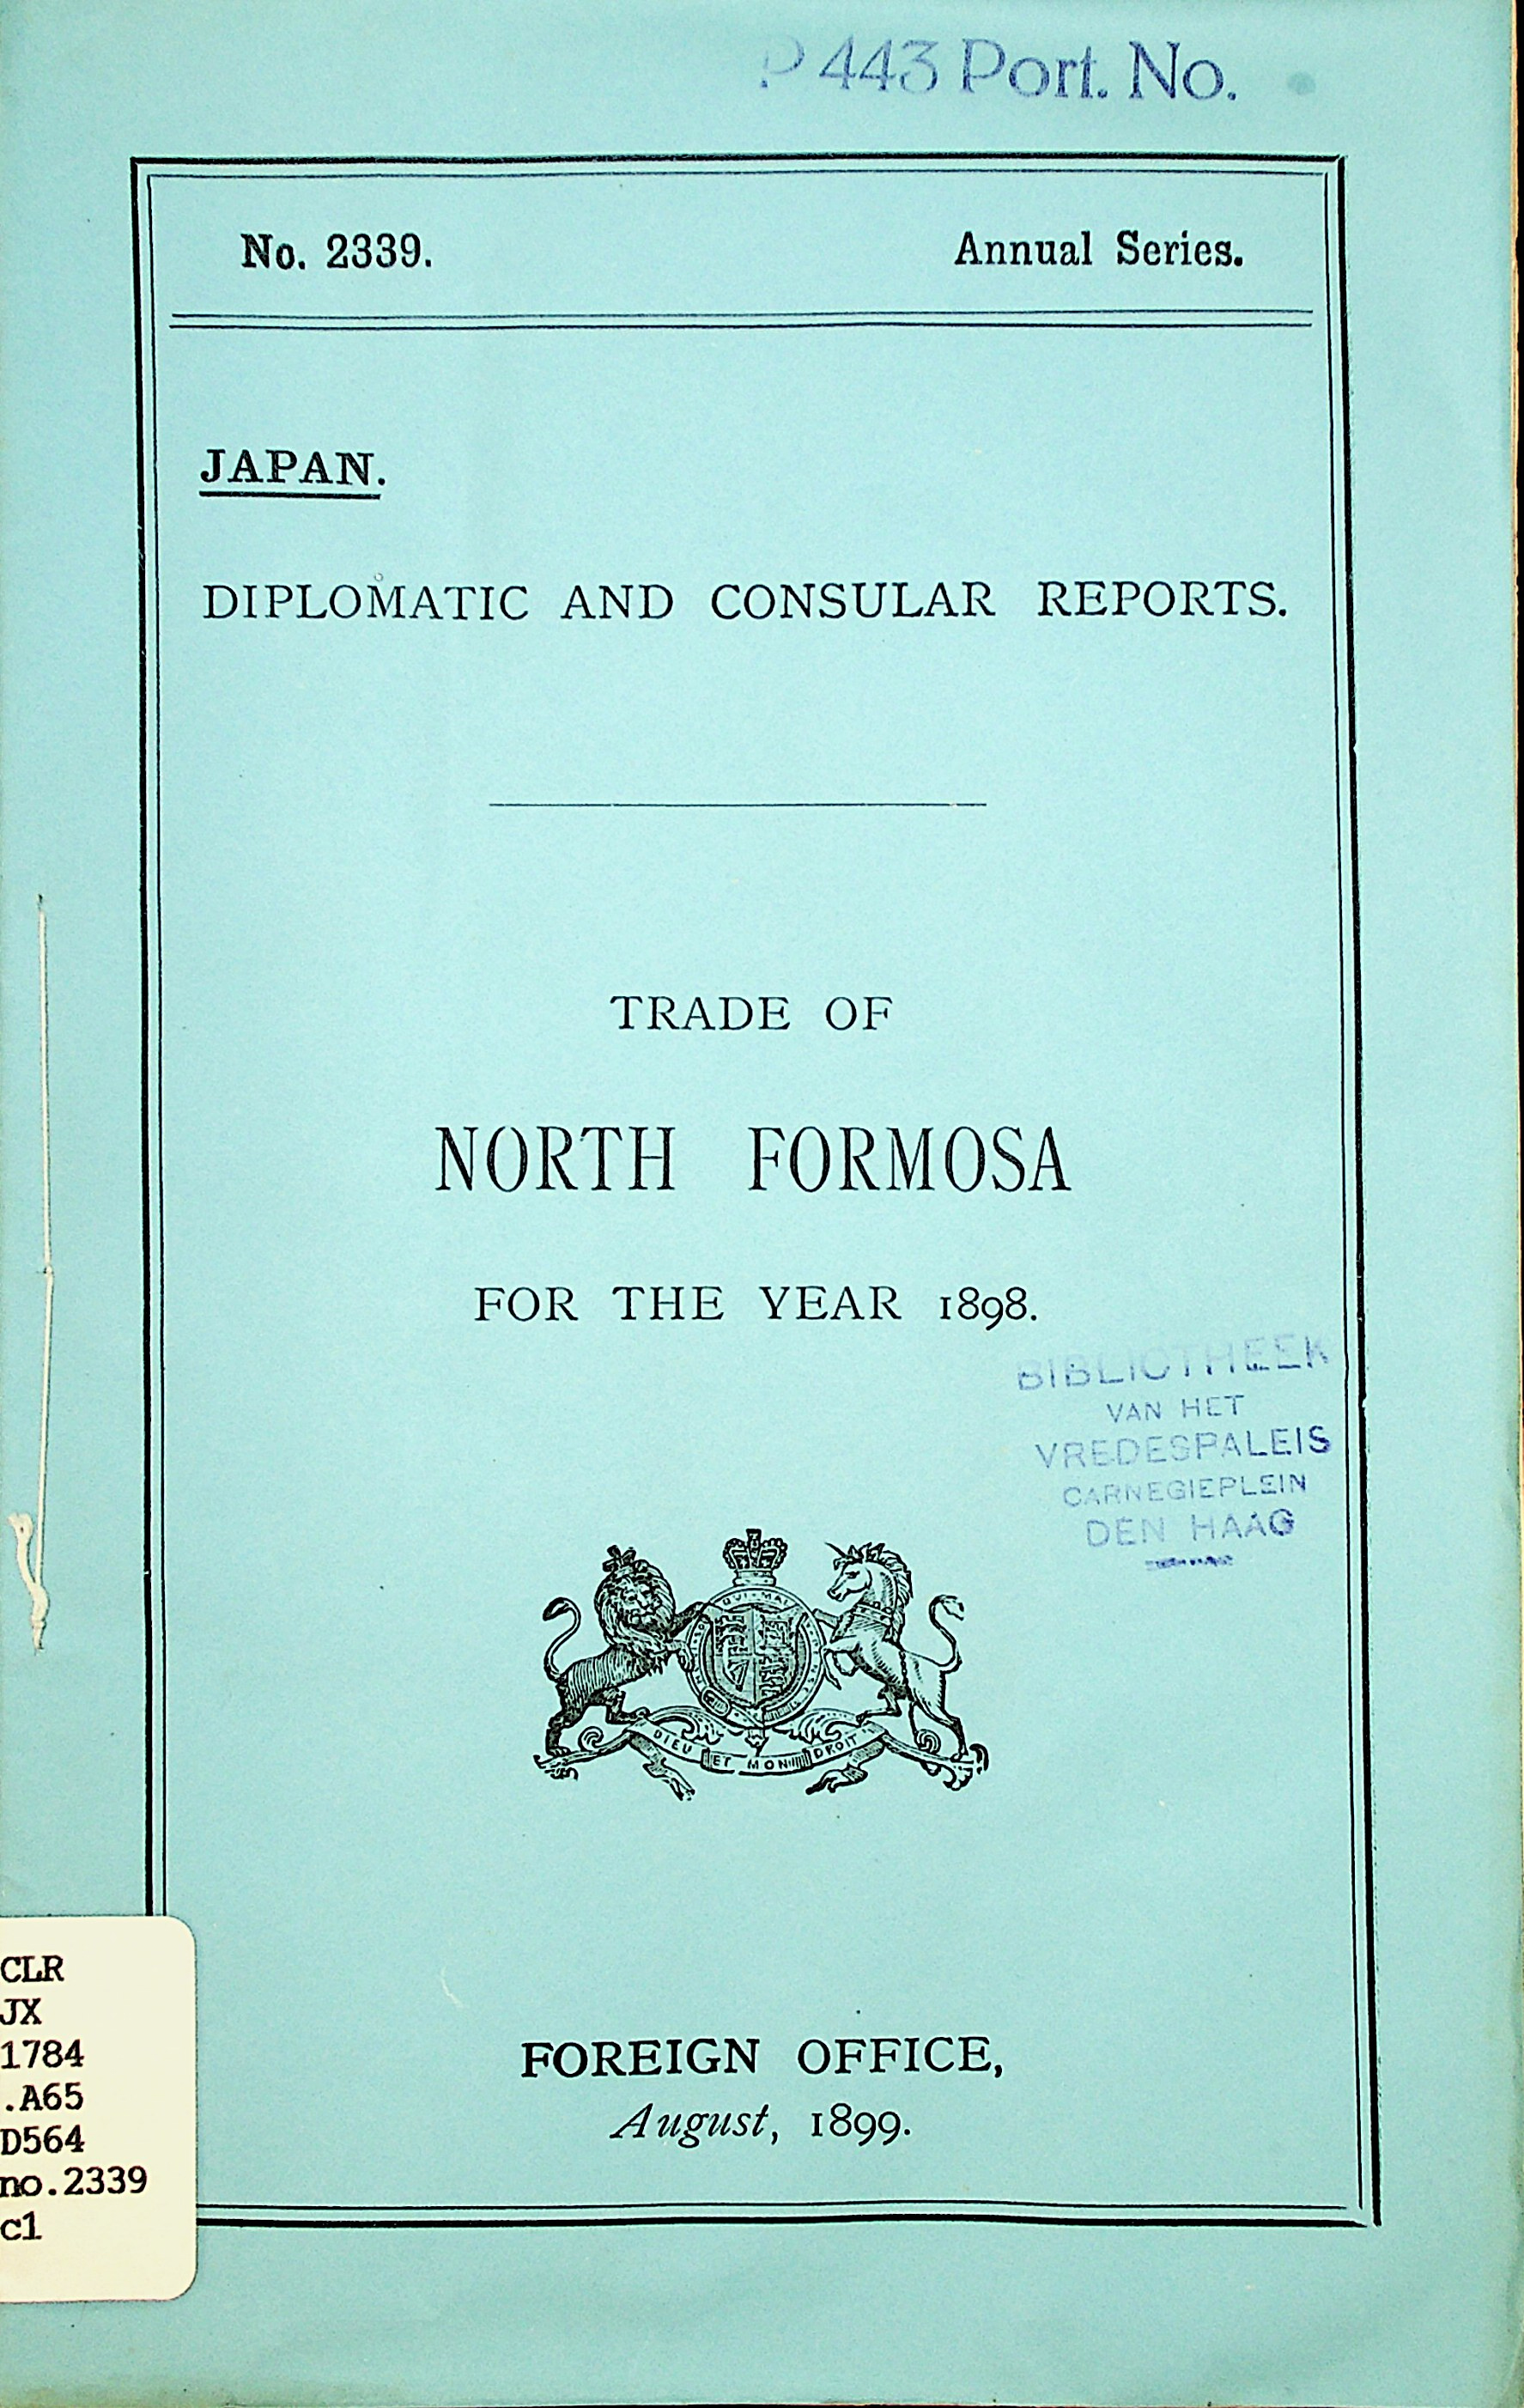 Japan : report for the year 1898 on the trade of North Formosa